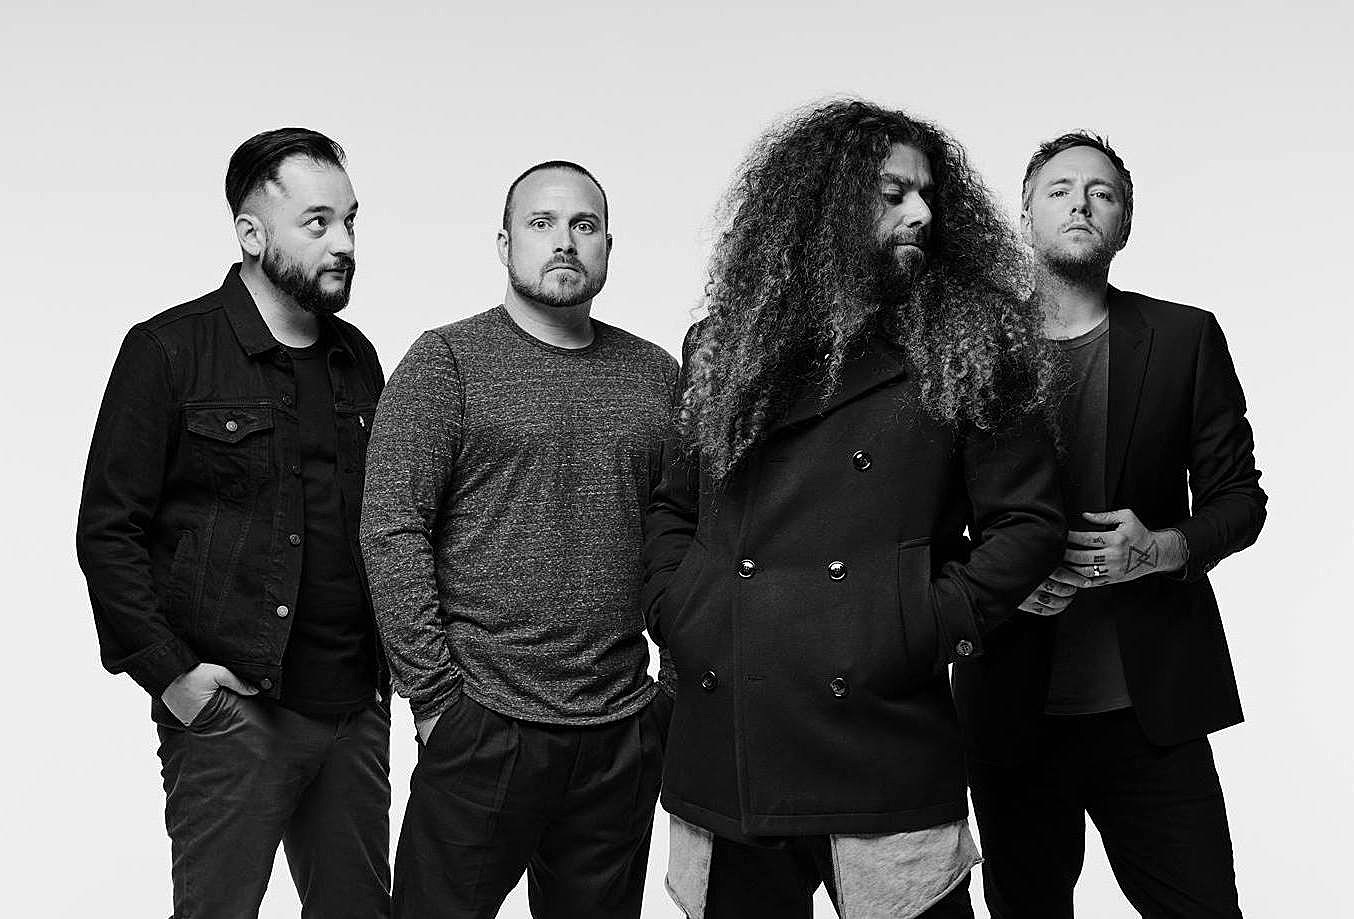 Coheed & Cambria release new song “Shoulders,” talk new album